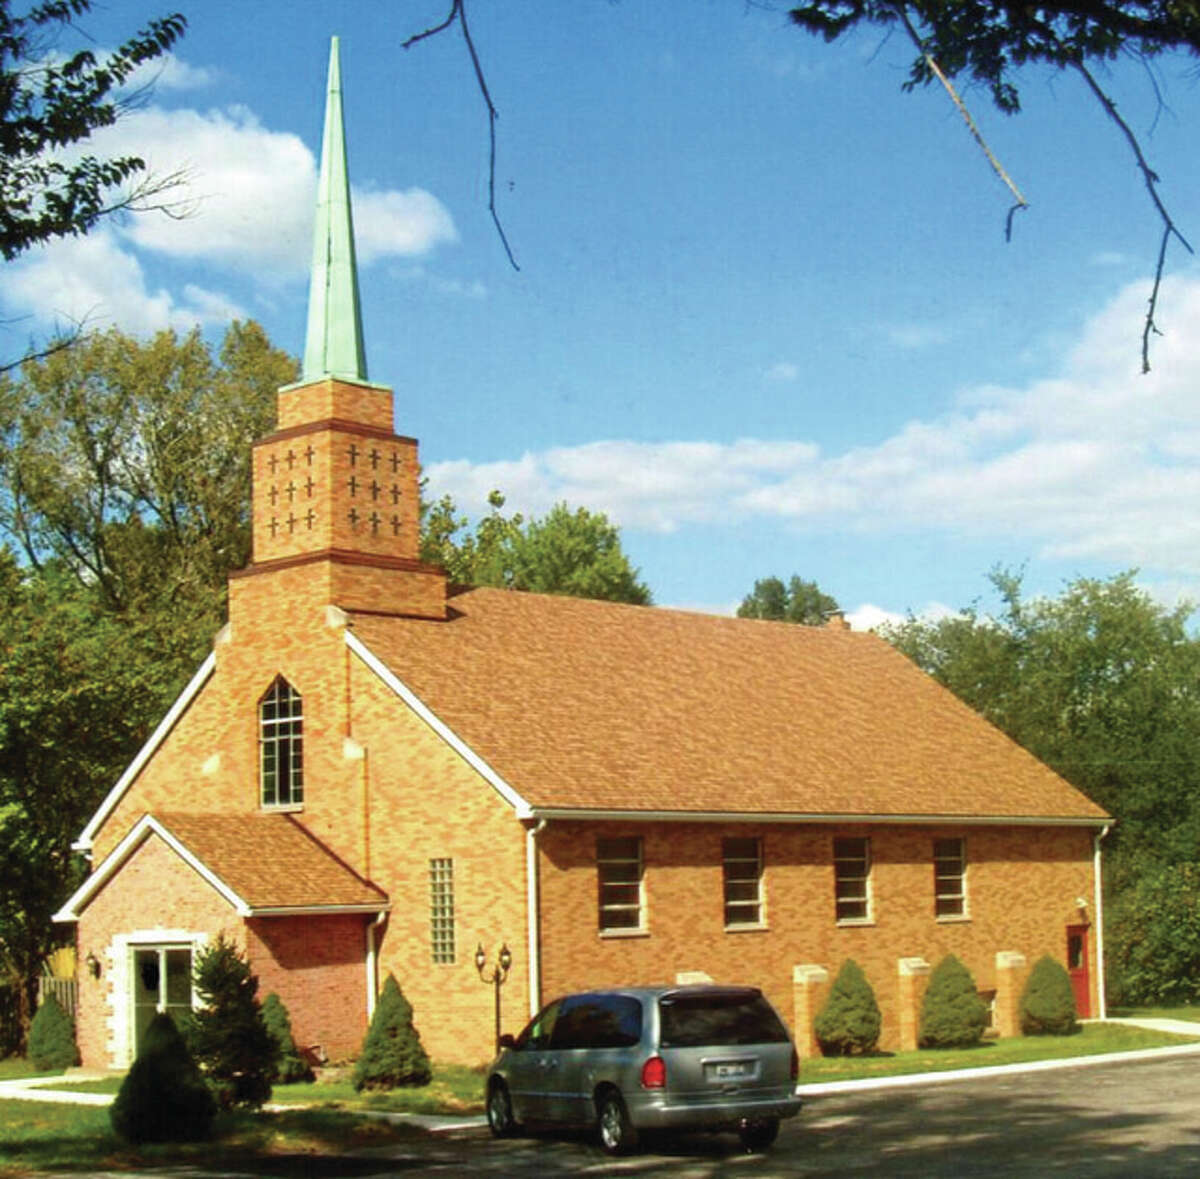 The church was built sometime in the late 1950s-early 1960s and has been utilized as a church of some form ever since its construction. Previously, the congregation was meeting in the United Methodist Church building in Hartford, where they have been for 14 years.